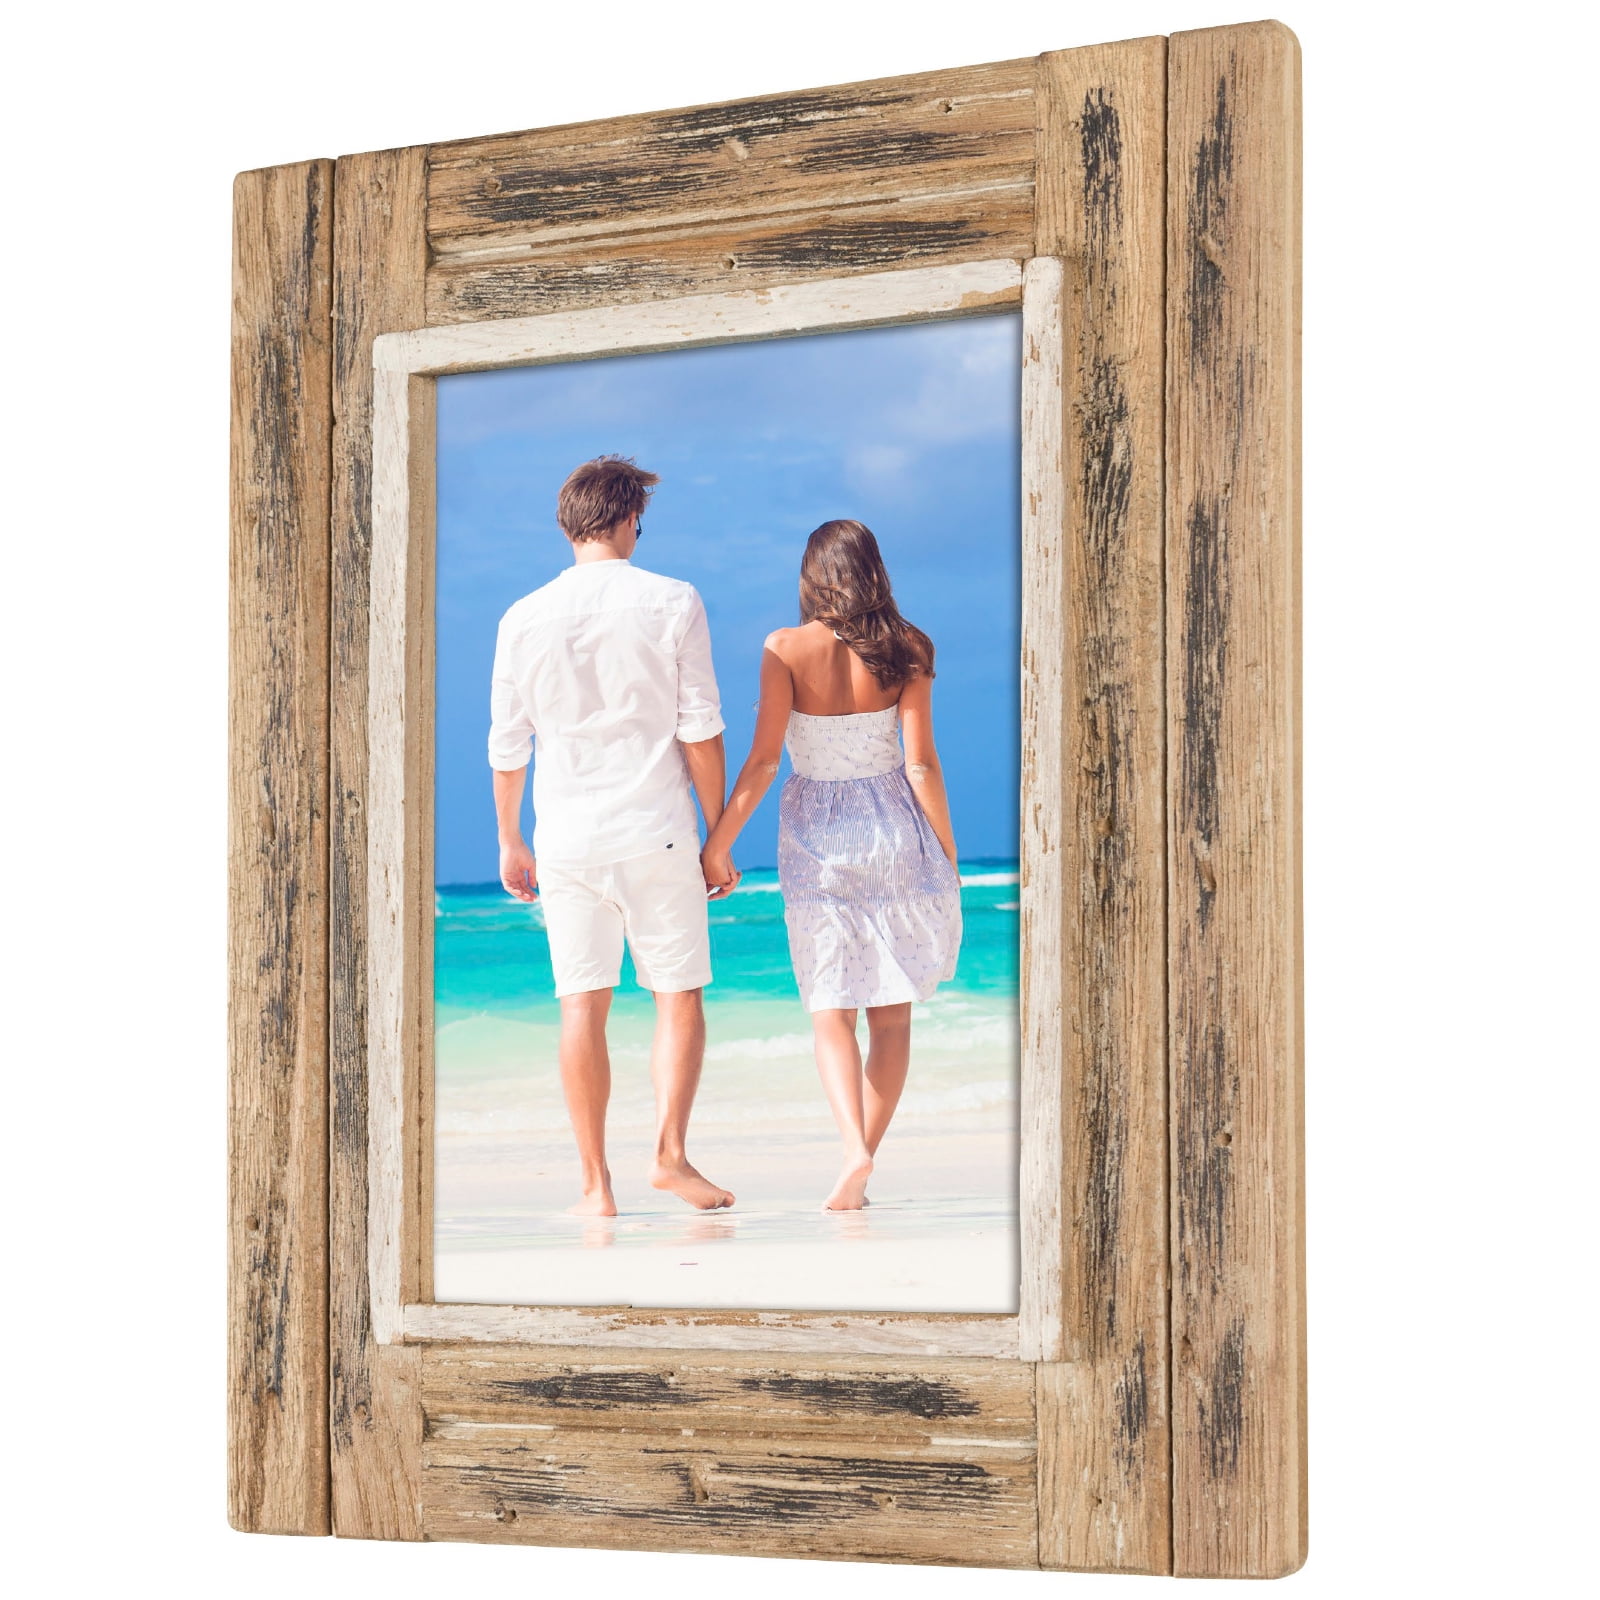 Wooden Shabby Chic Rustic Driftwood Hanging Photo Picture Frame-6x4" x5 